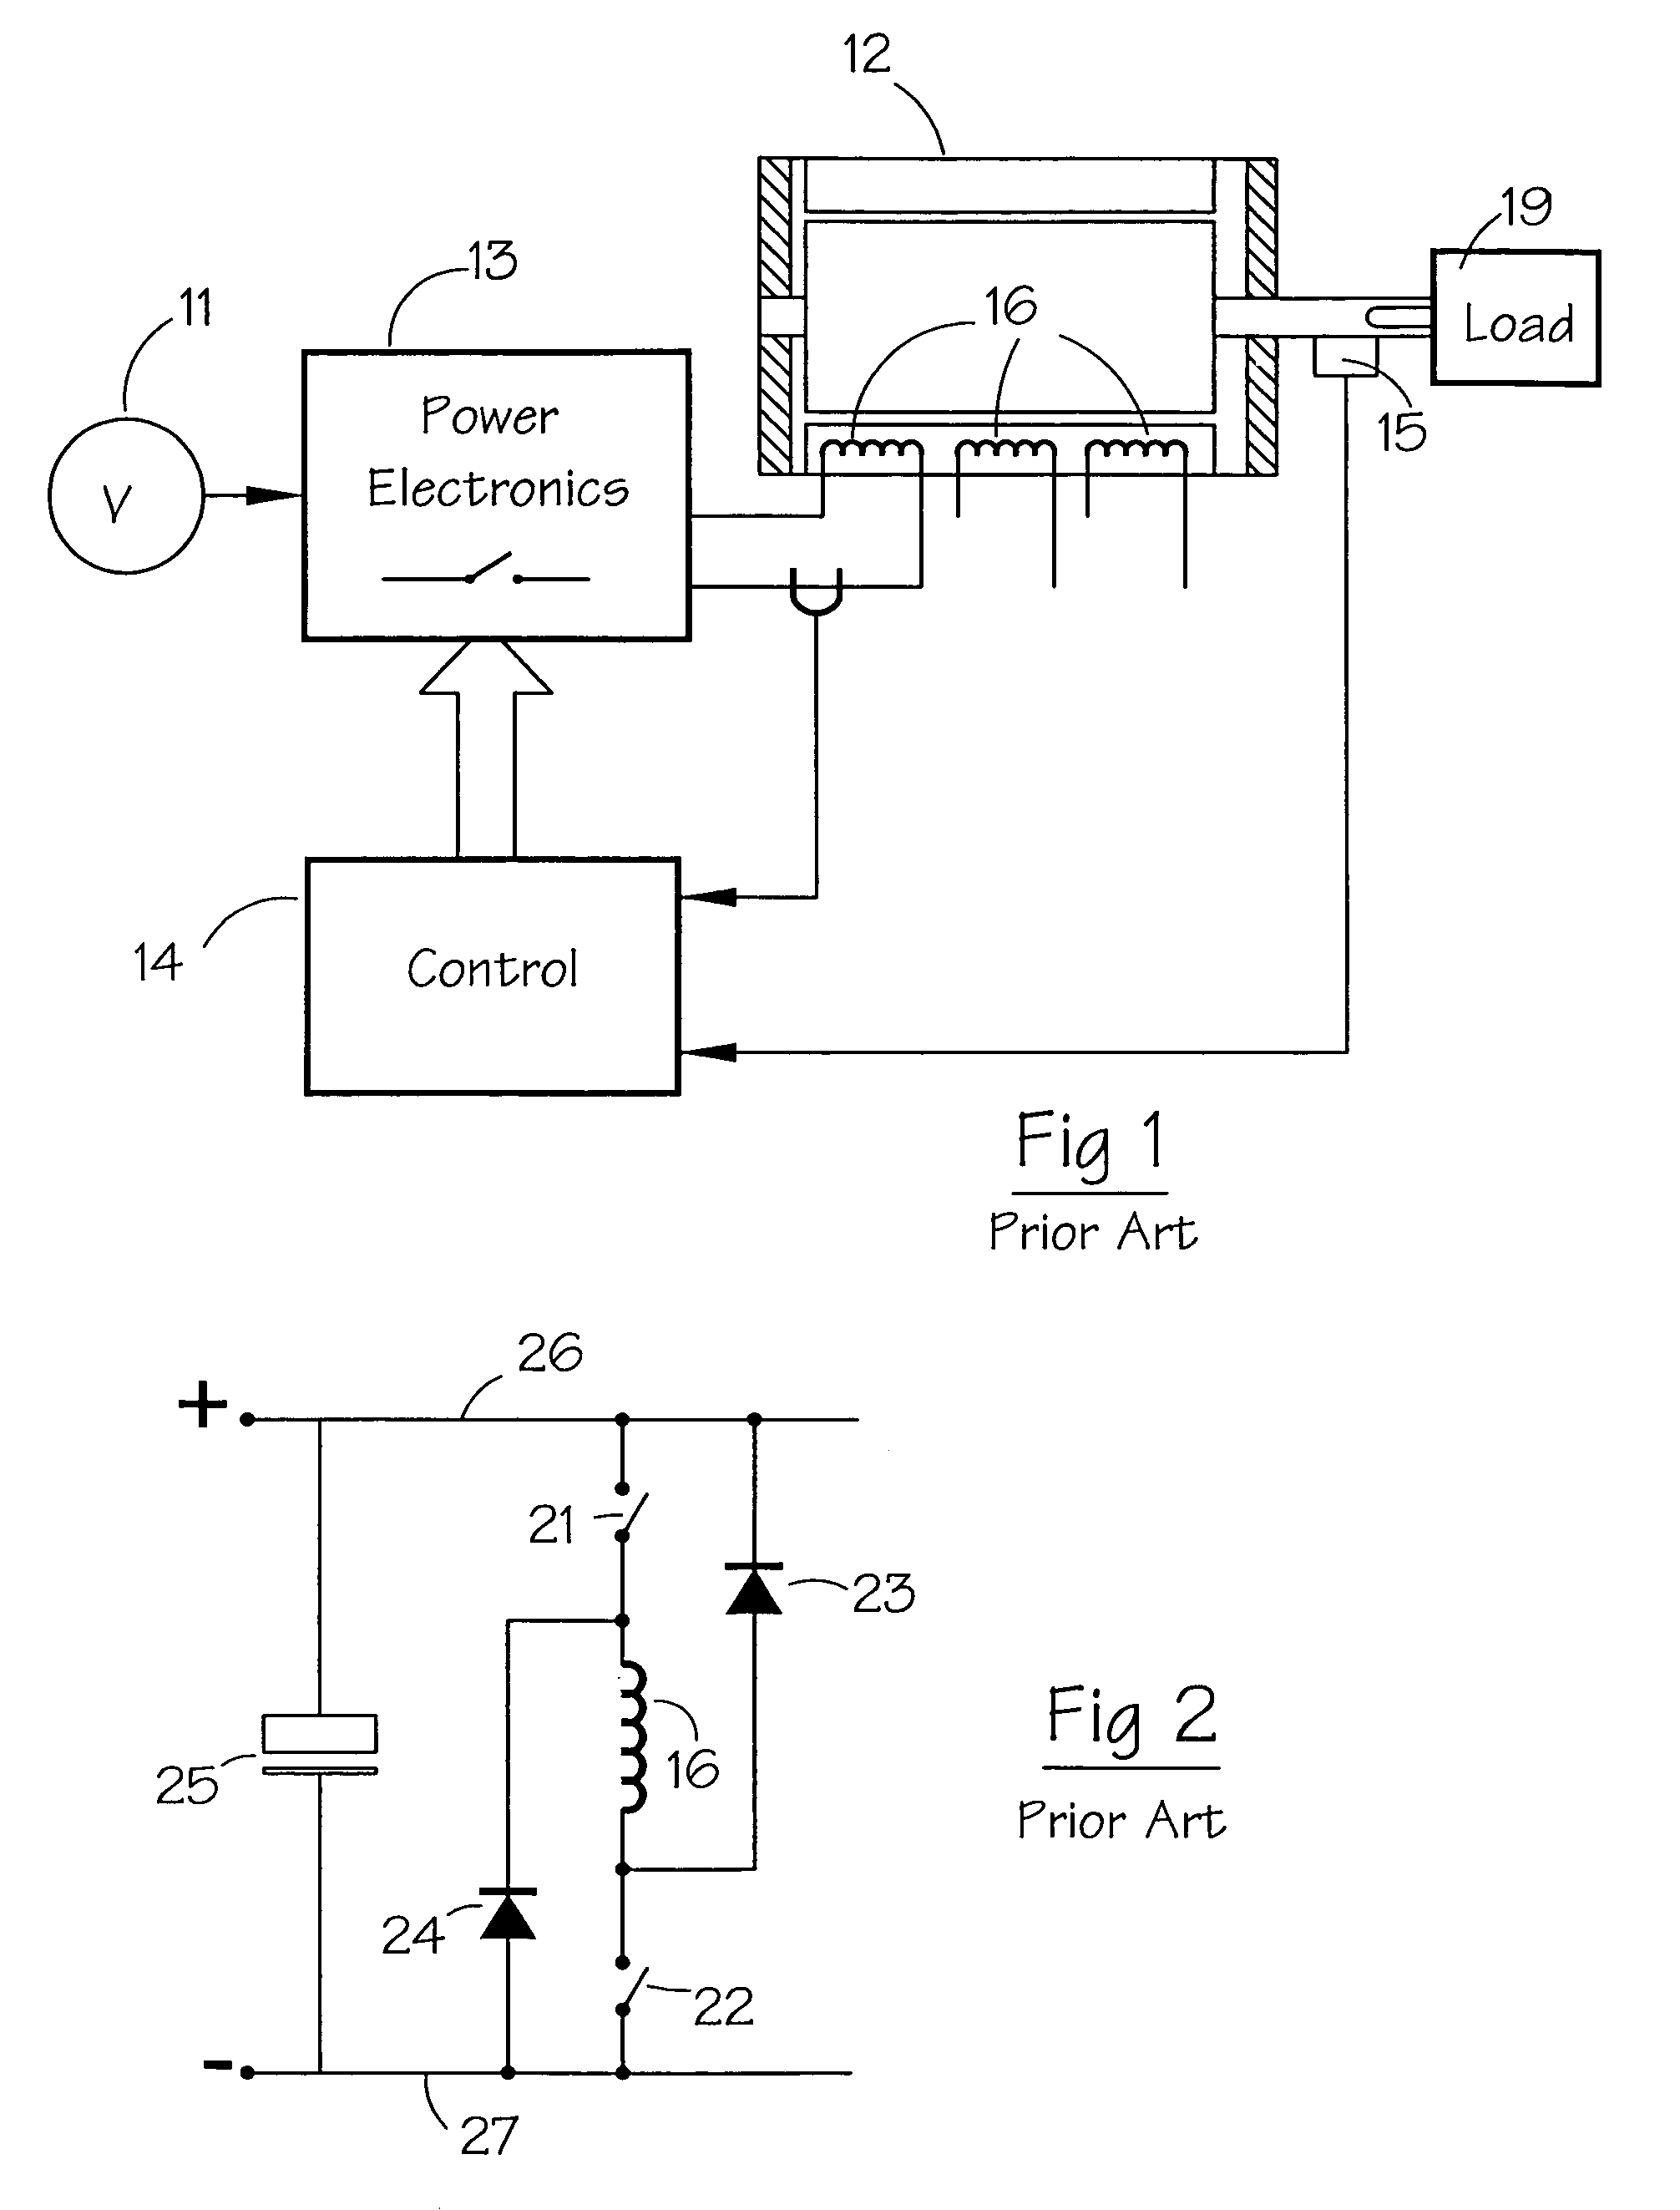 Excitation of switched reluctance motors